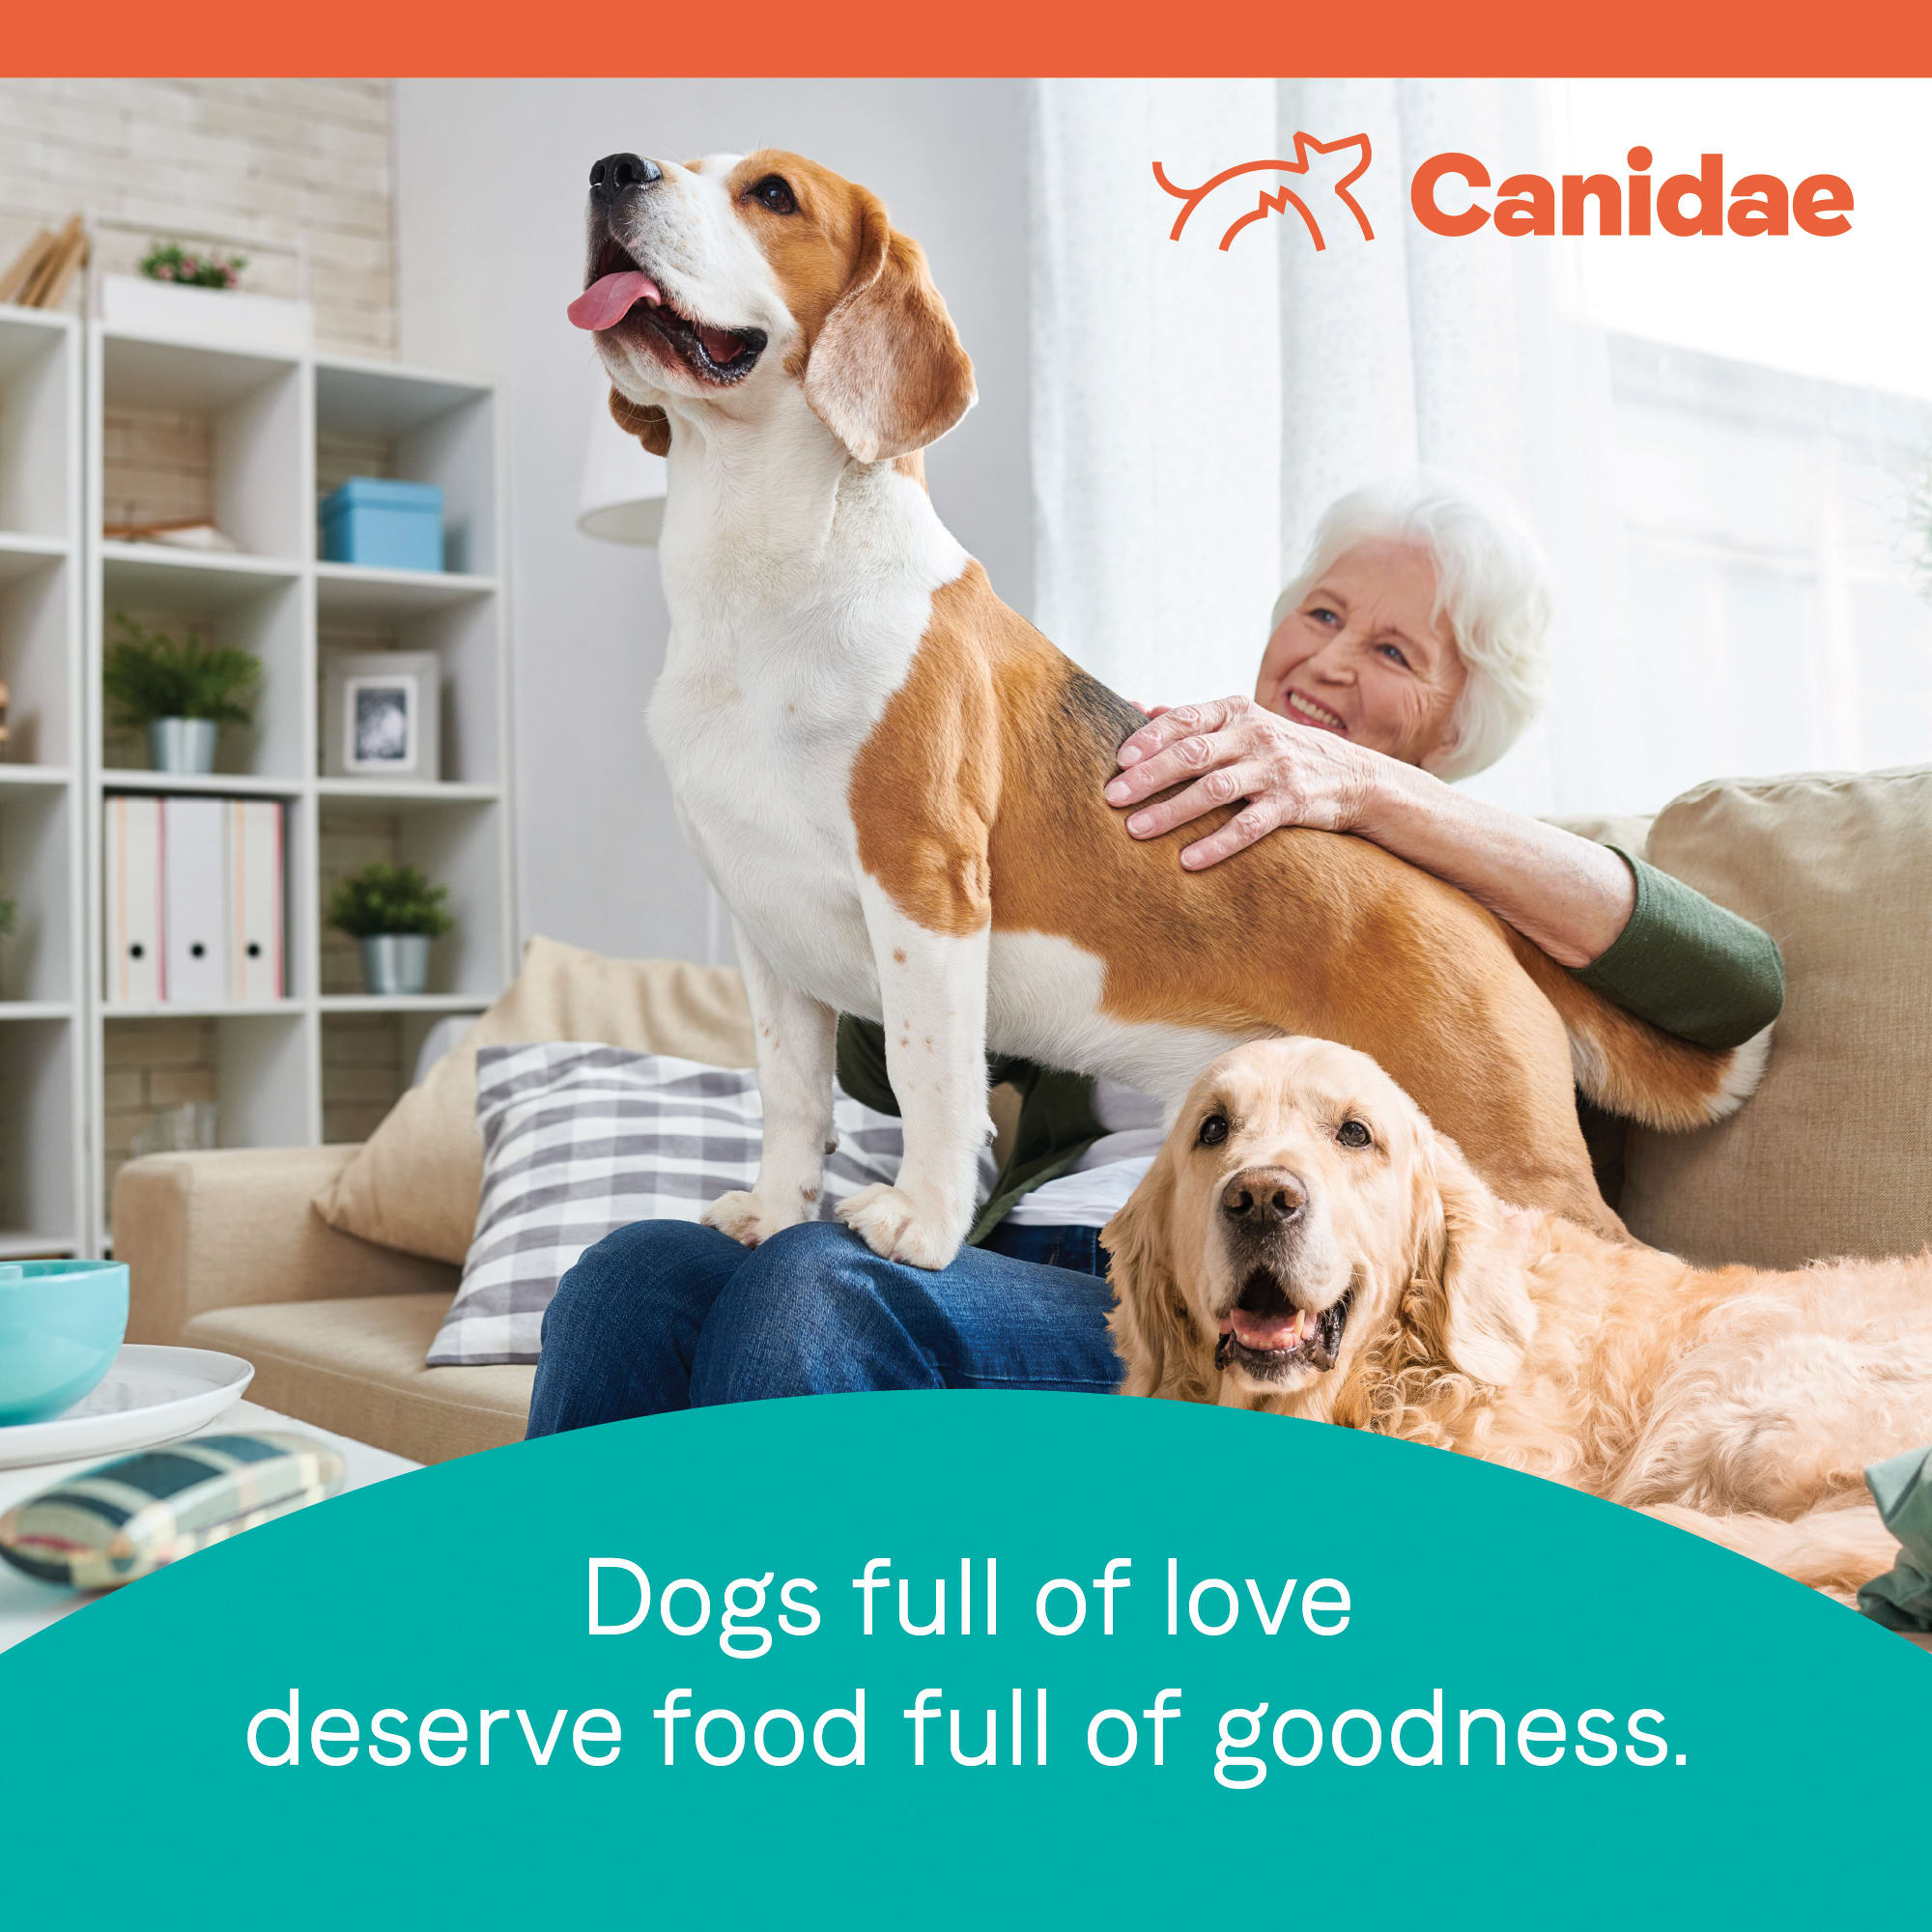 canidae less active